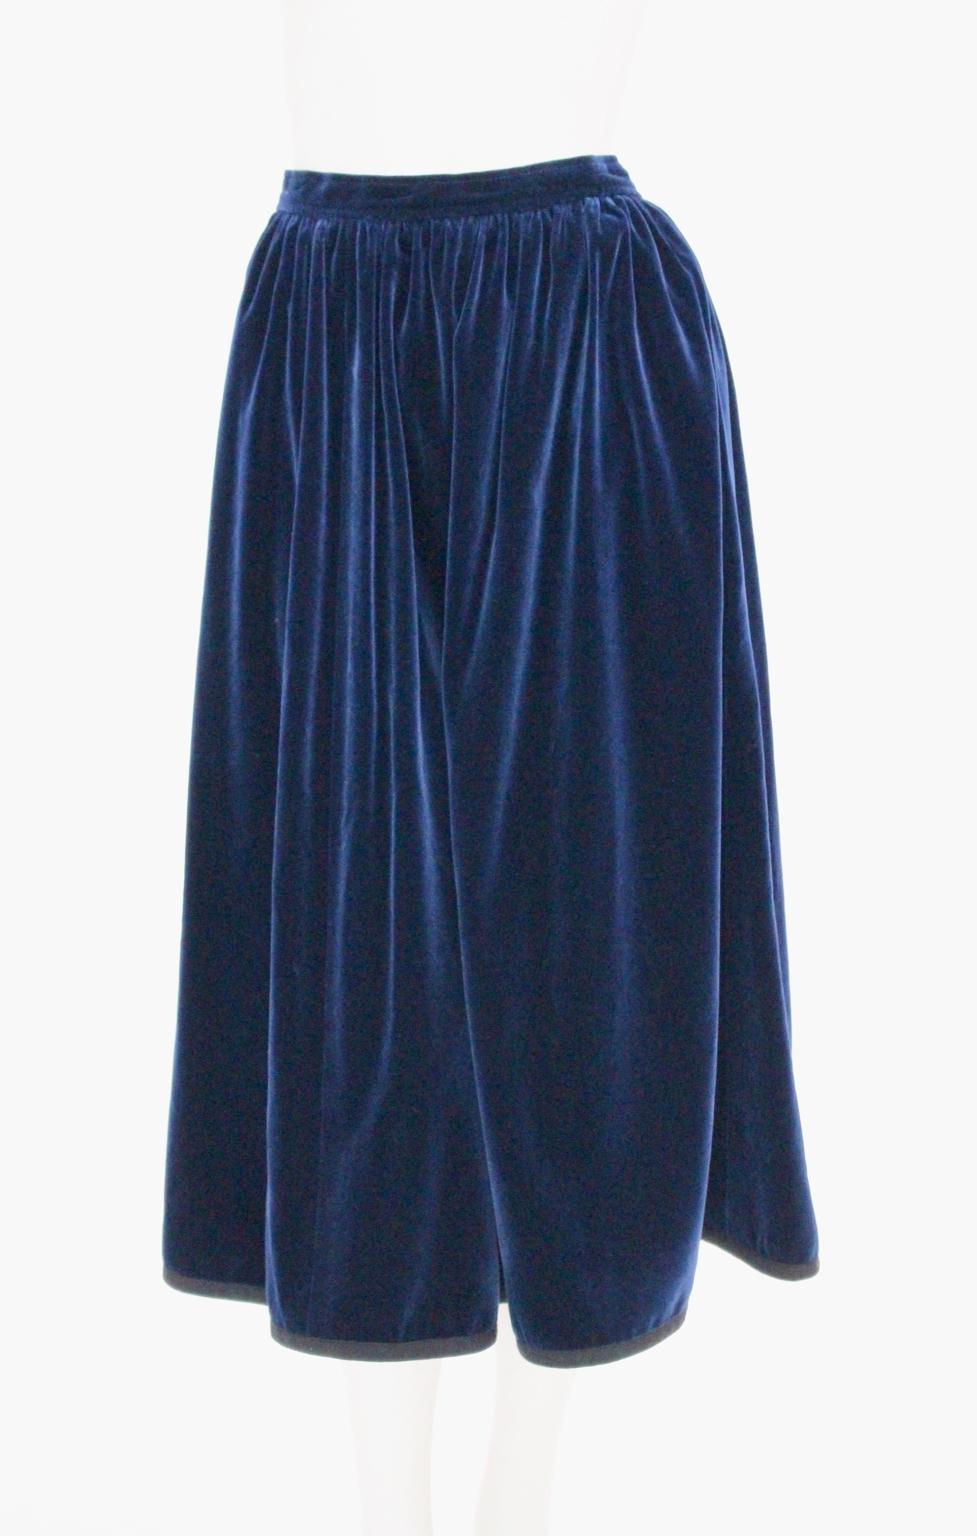 This presented skirt was designed by Yves Saint Laurent Rive Gauche and was made in France.
The blue velvet skirt shows tiny pleats on the waist and a black ribbon braid at the hem.
Zip closure and a hook for closing the skirt.
A nice side pocket on